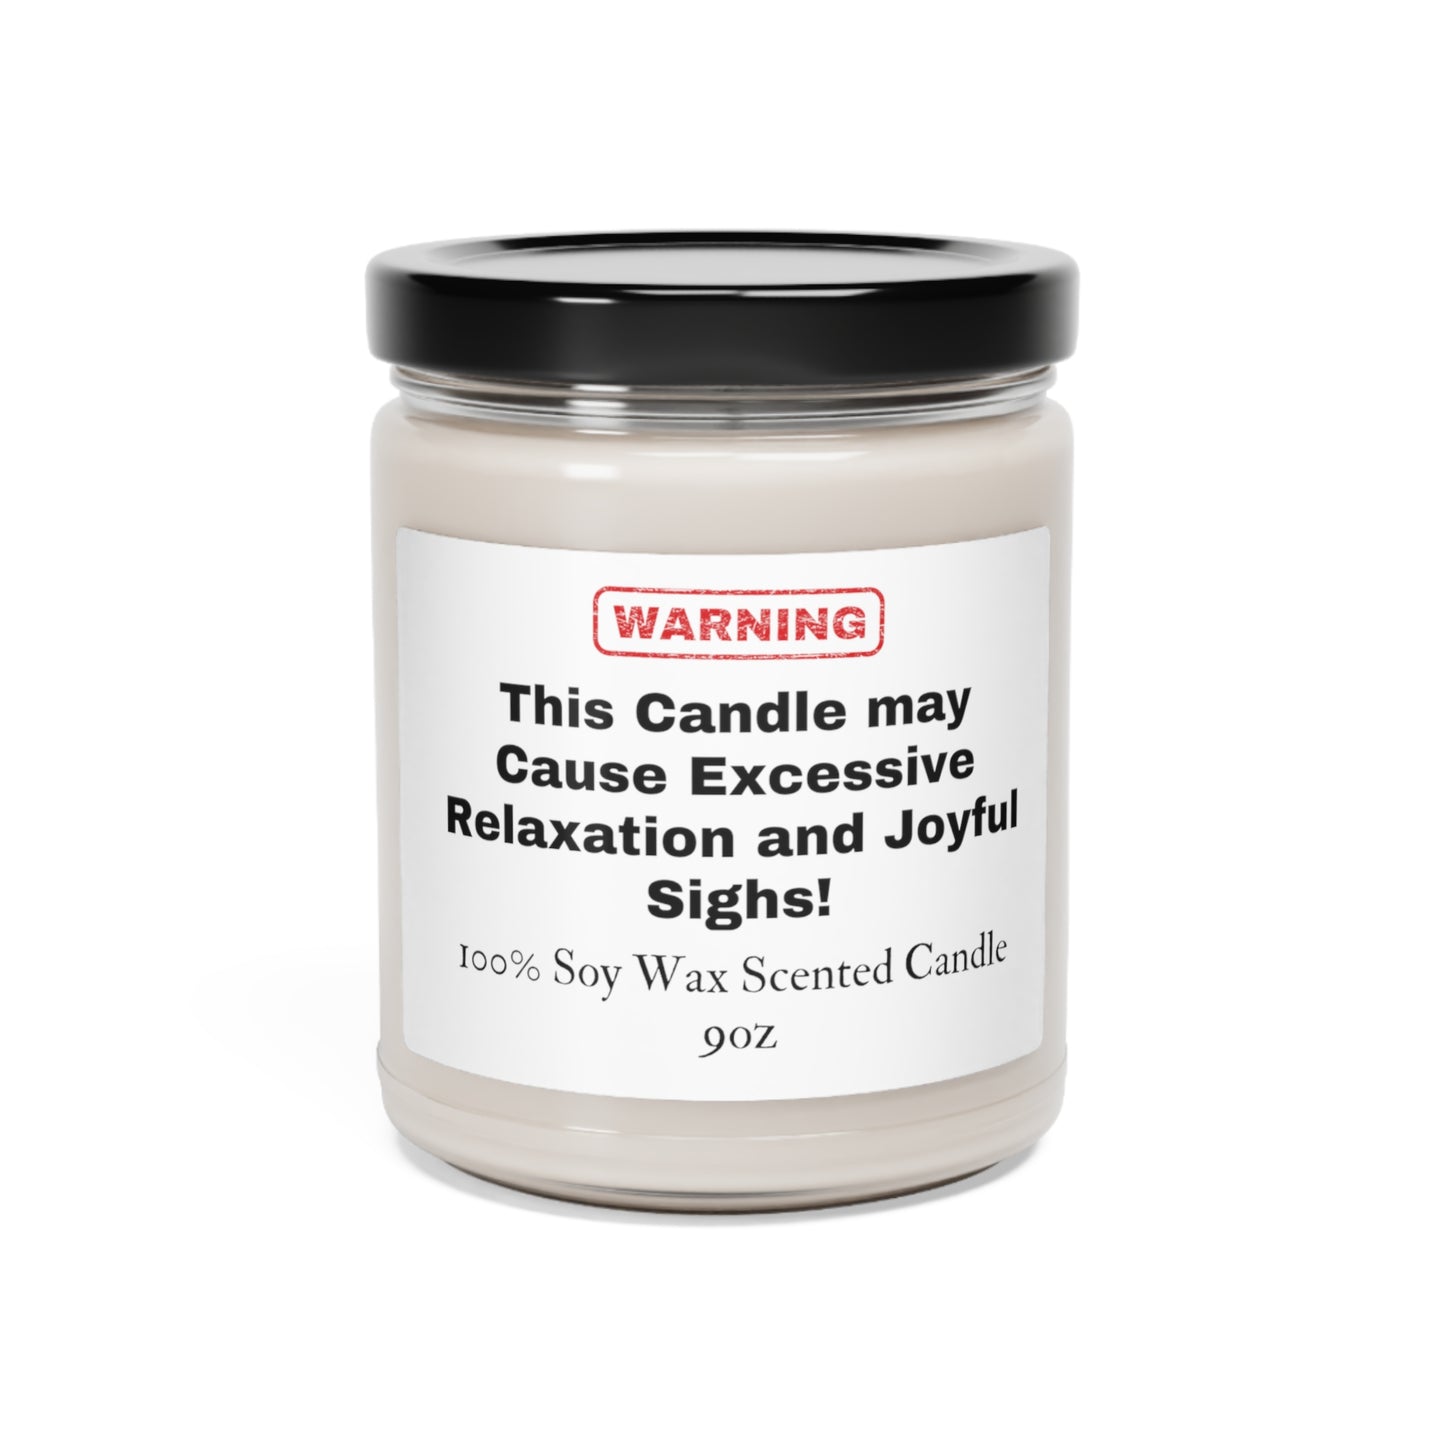 Warning: May Cause Laughter 9oz Soy Candle - Funny Adult Humor Gift, Customizable Candle for Him or Her Home Decor   